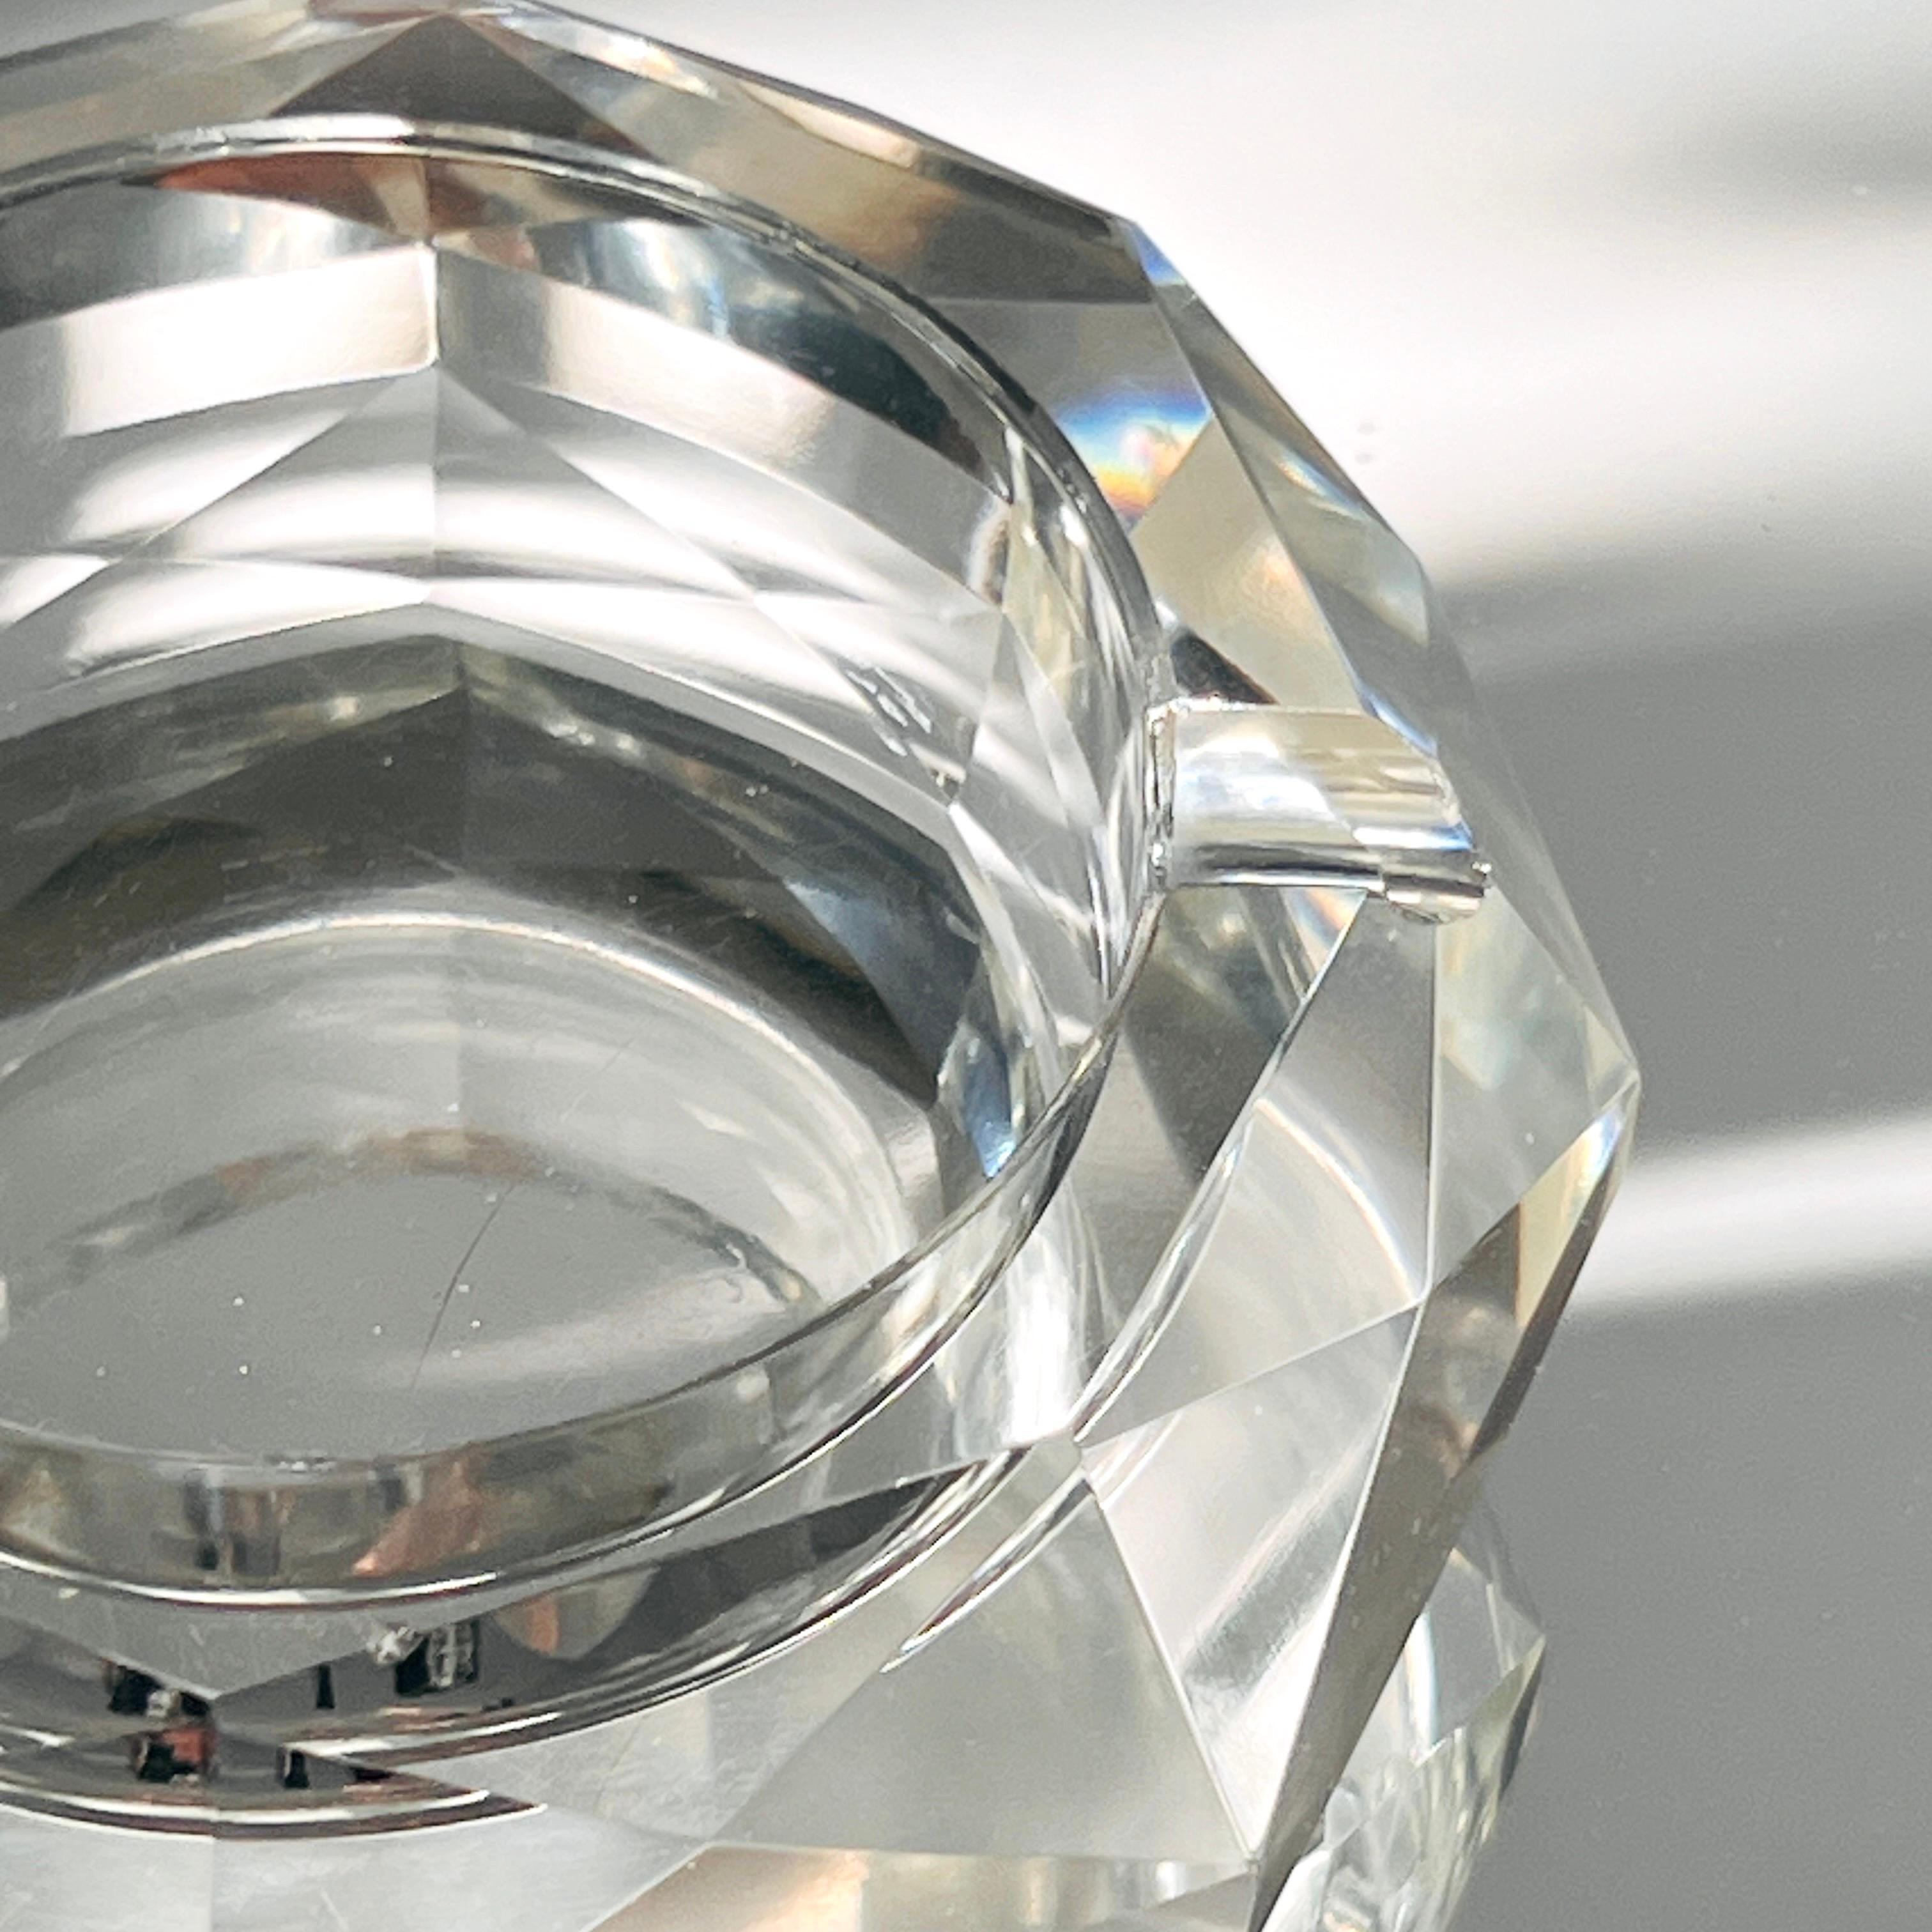 Faceted Crystal Ashtray with Diamond Prism Design, France, c. 1960s In Good Condition For Sale In Fort Lauderdale, FL